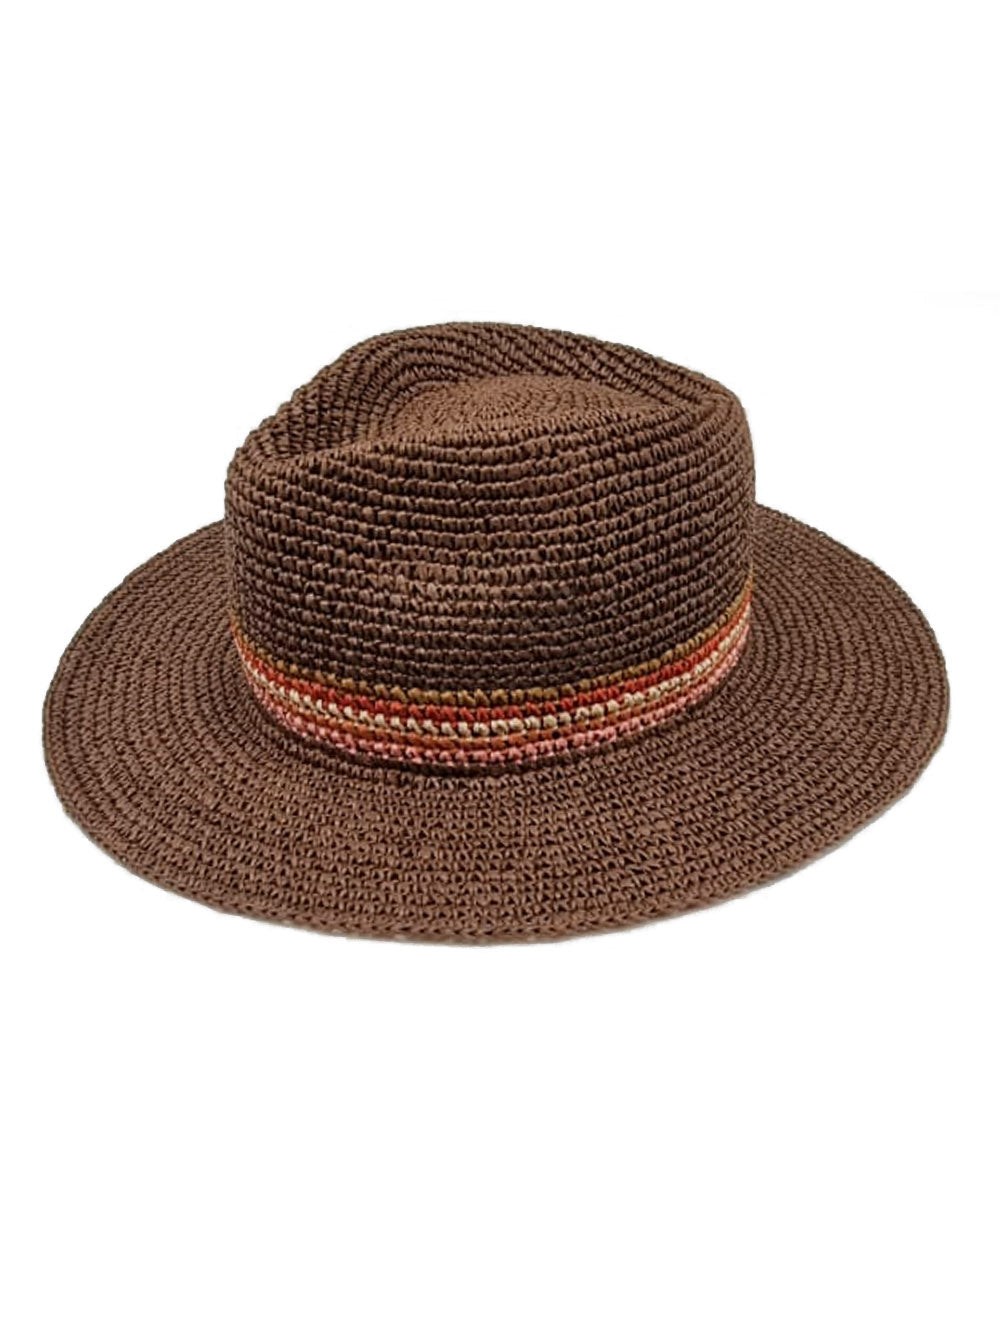 Havana Trilby hat in Chocolate